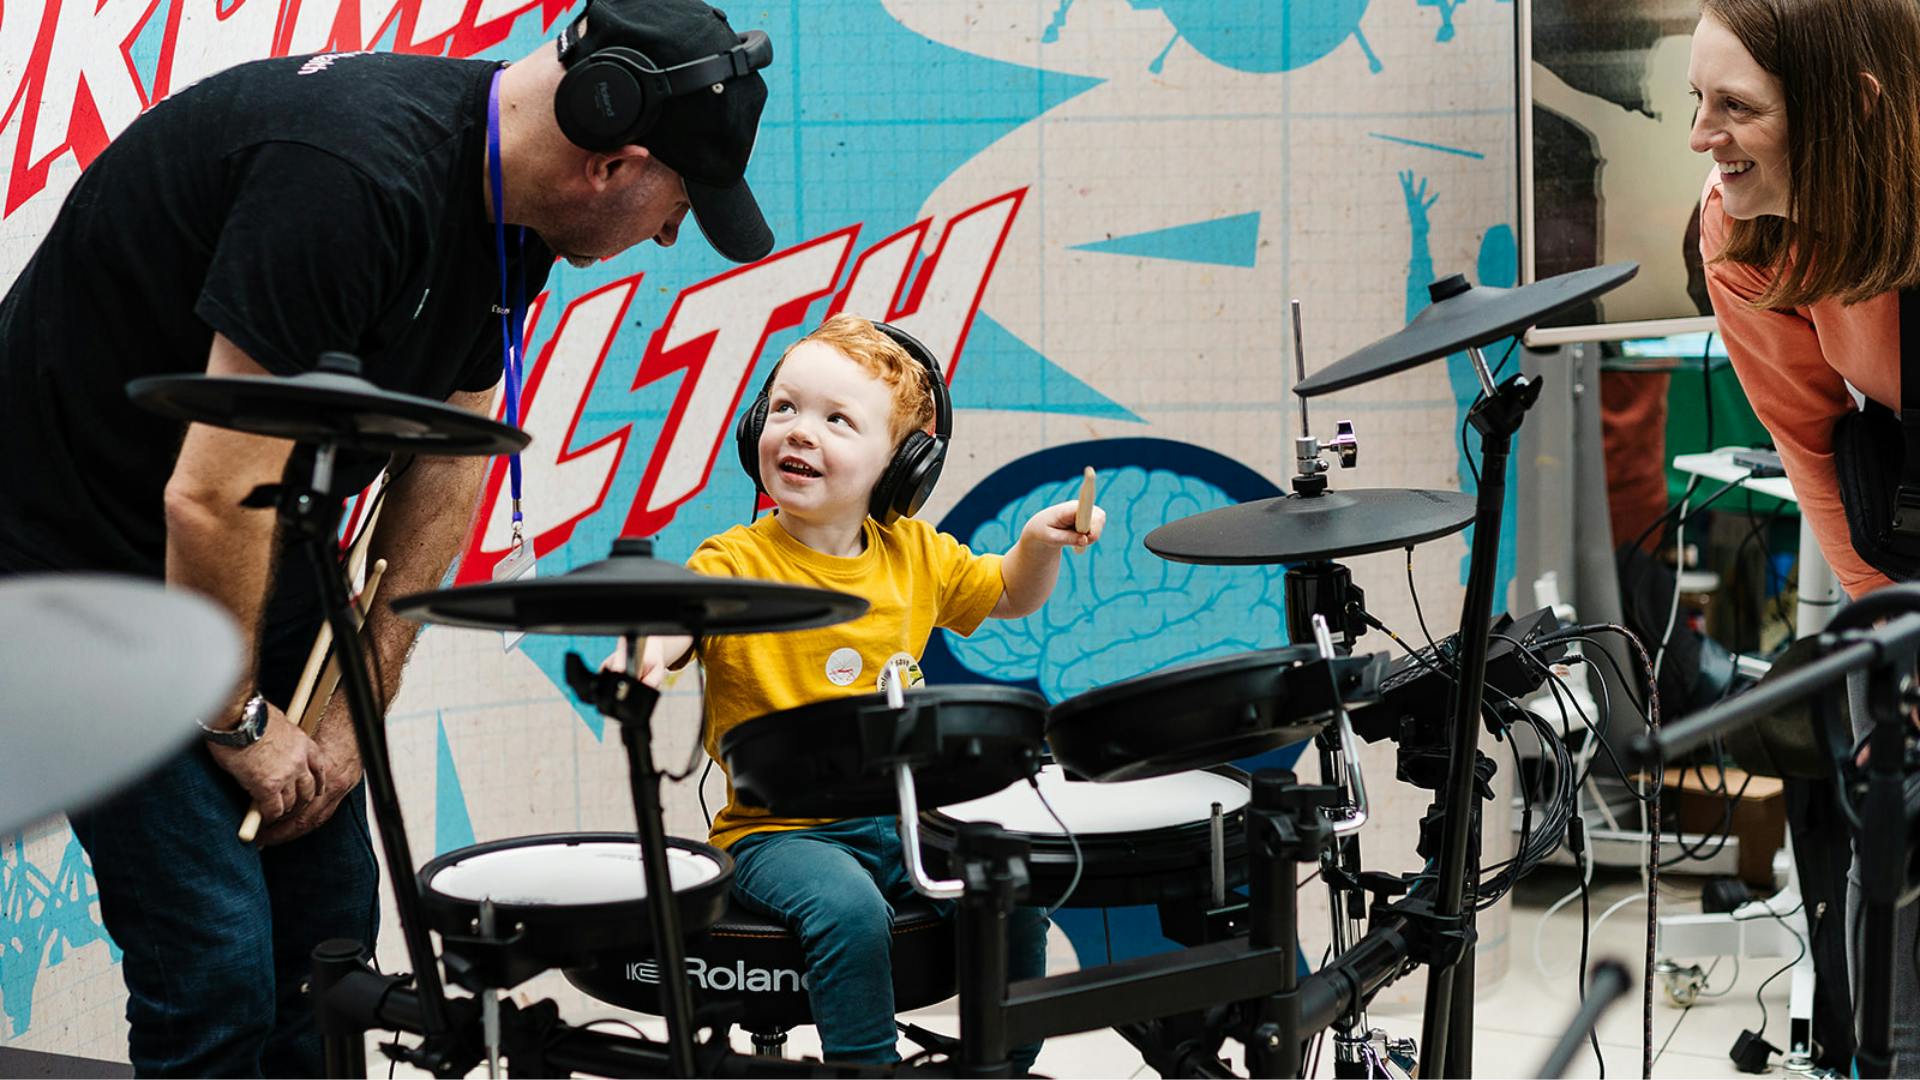 A young child playing the drums, wearing headphones